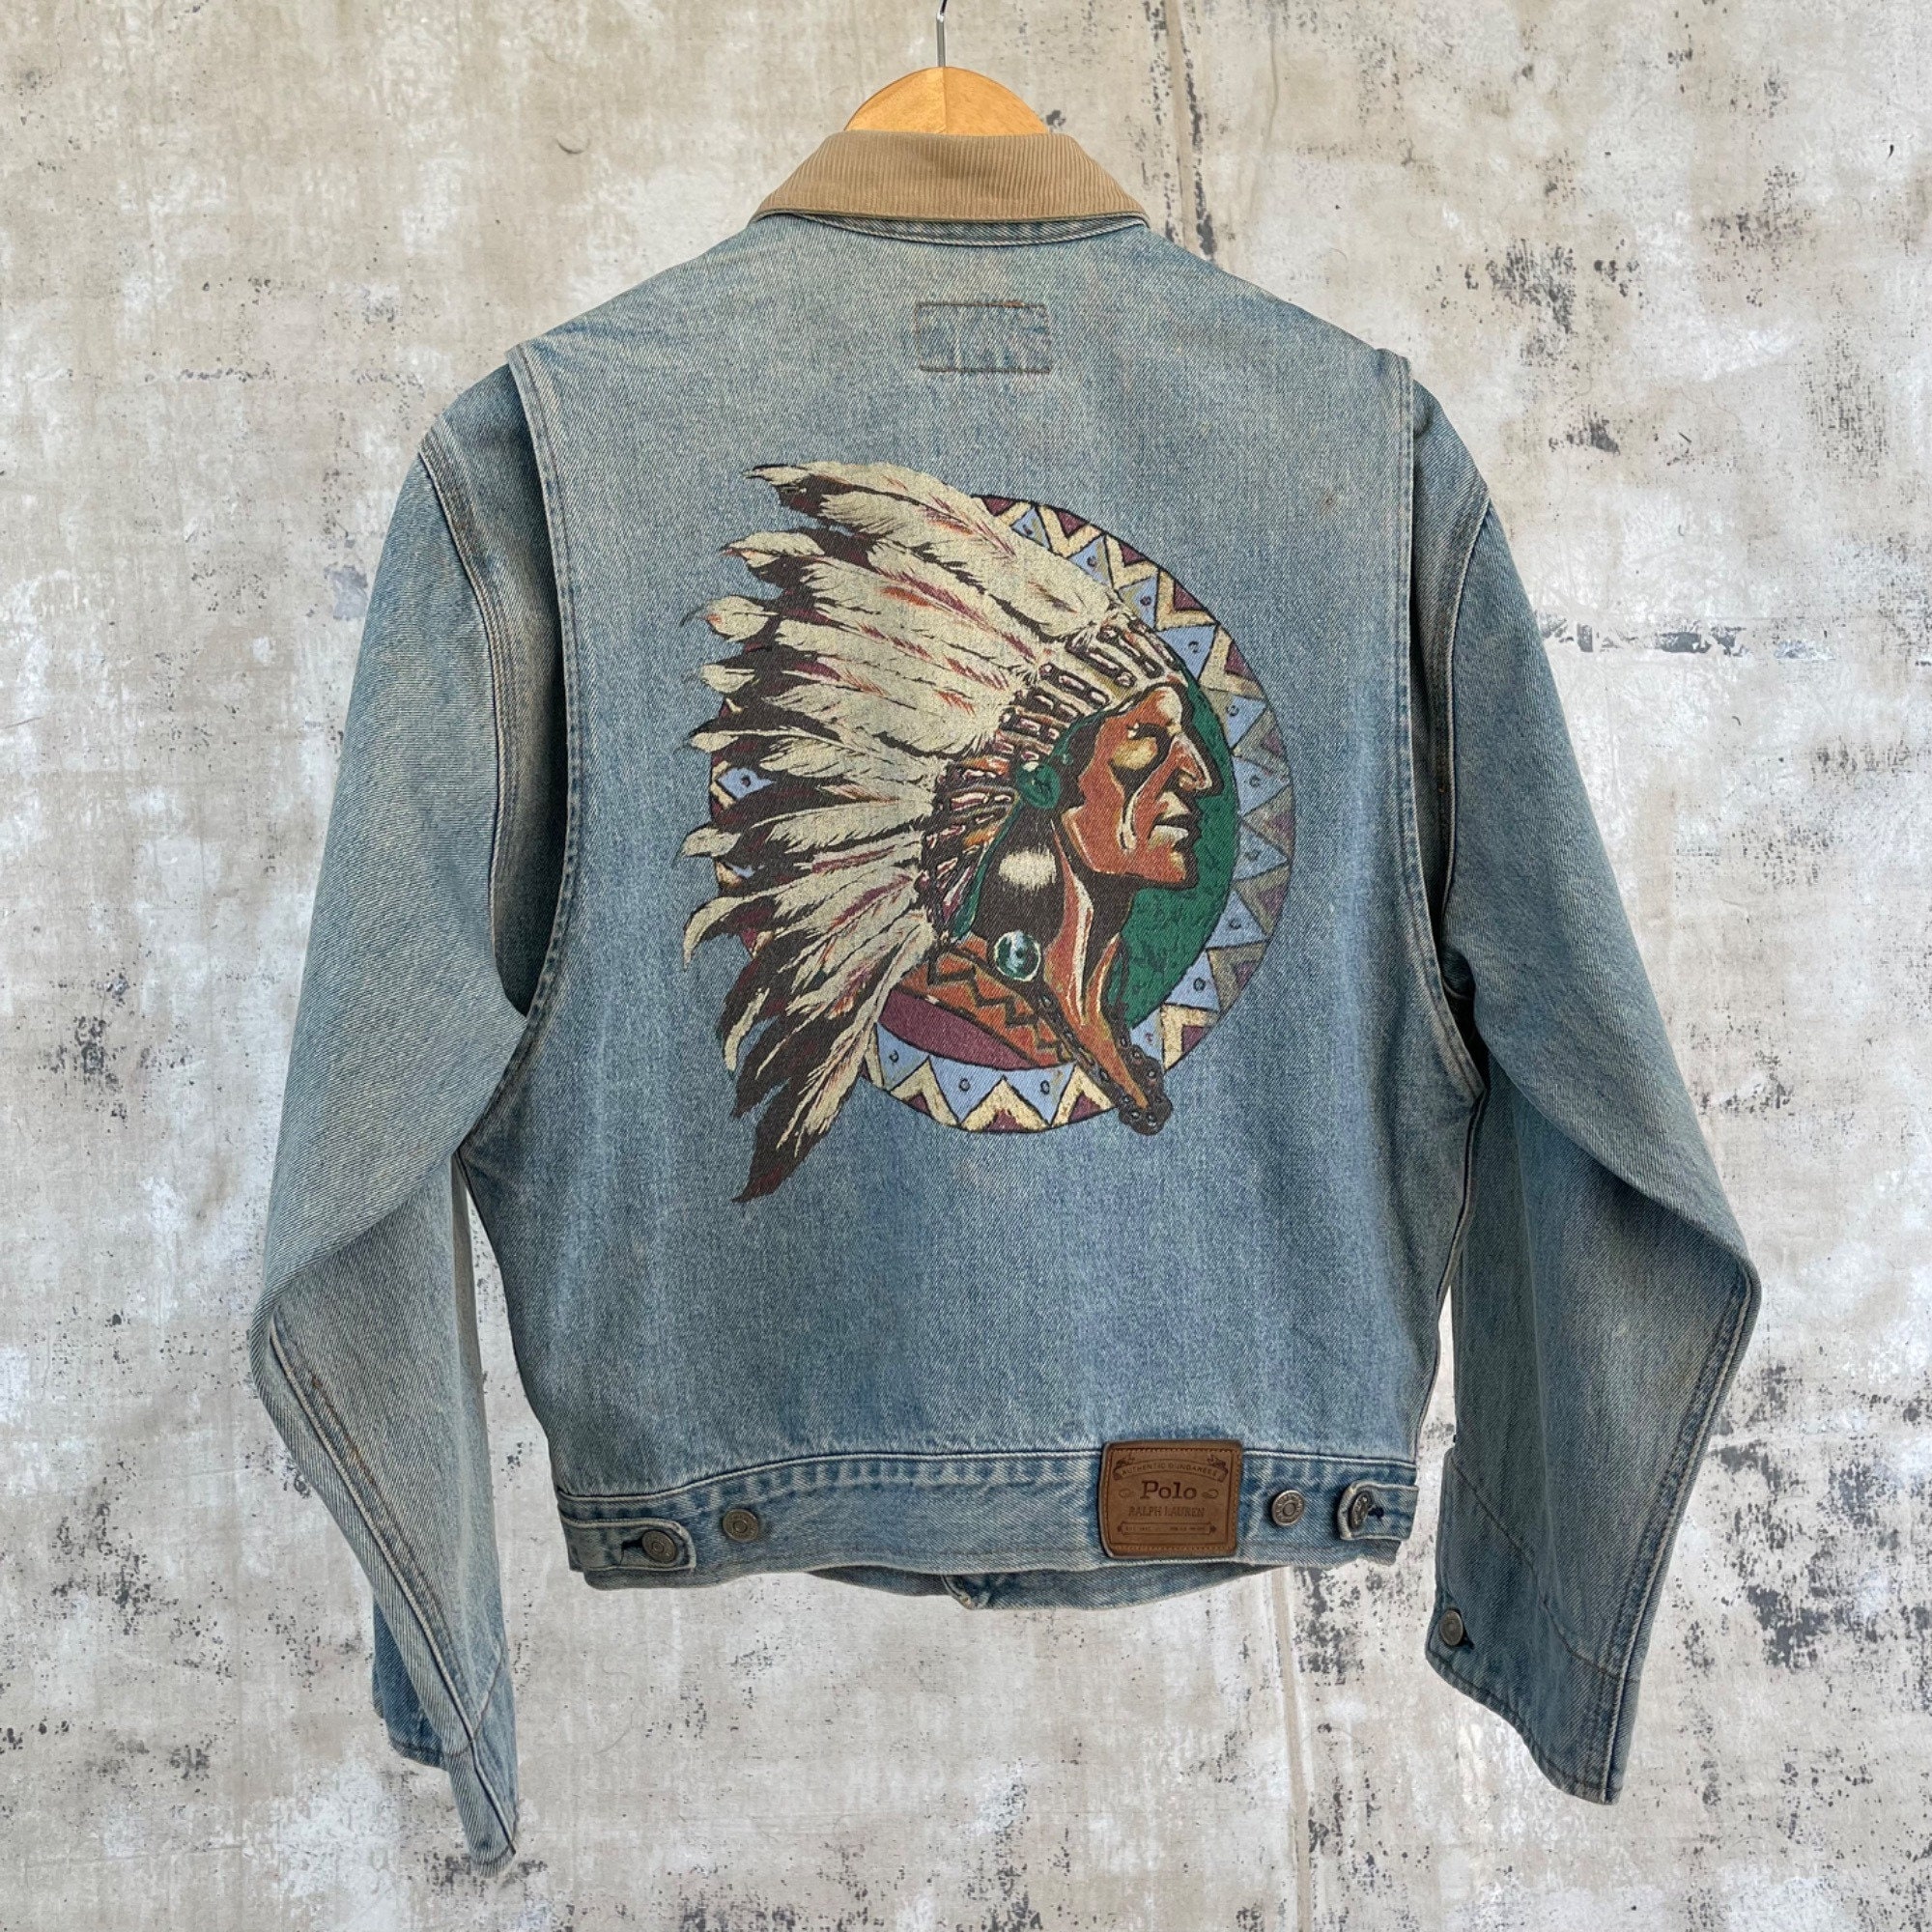 Vintage Polo Indian Chief Head Denim Jacket Size M 90s Ralph - Etsy